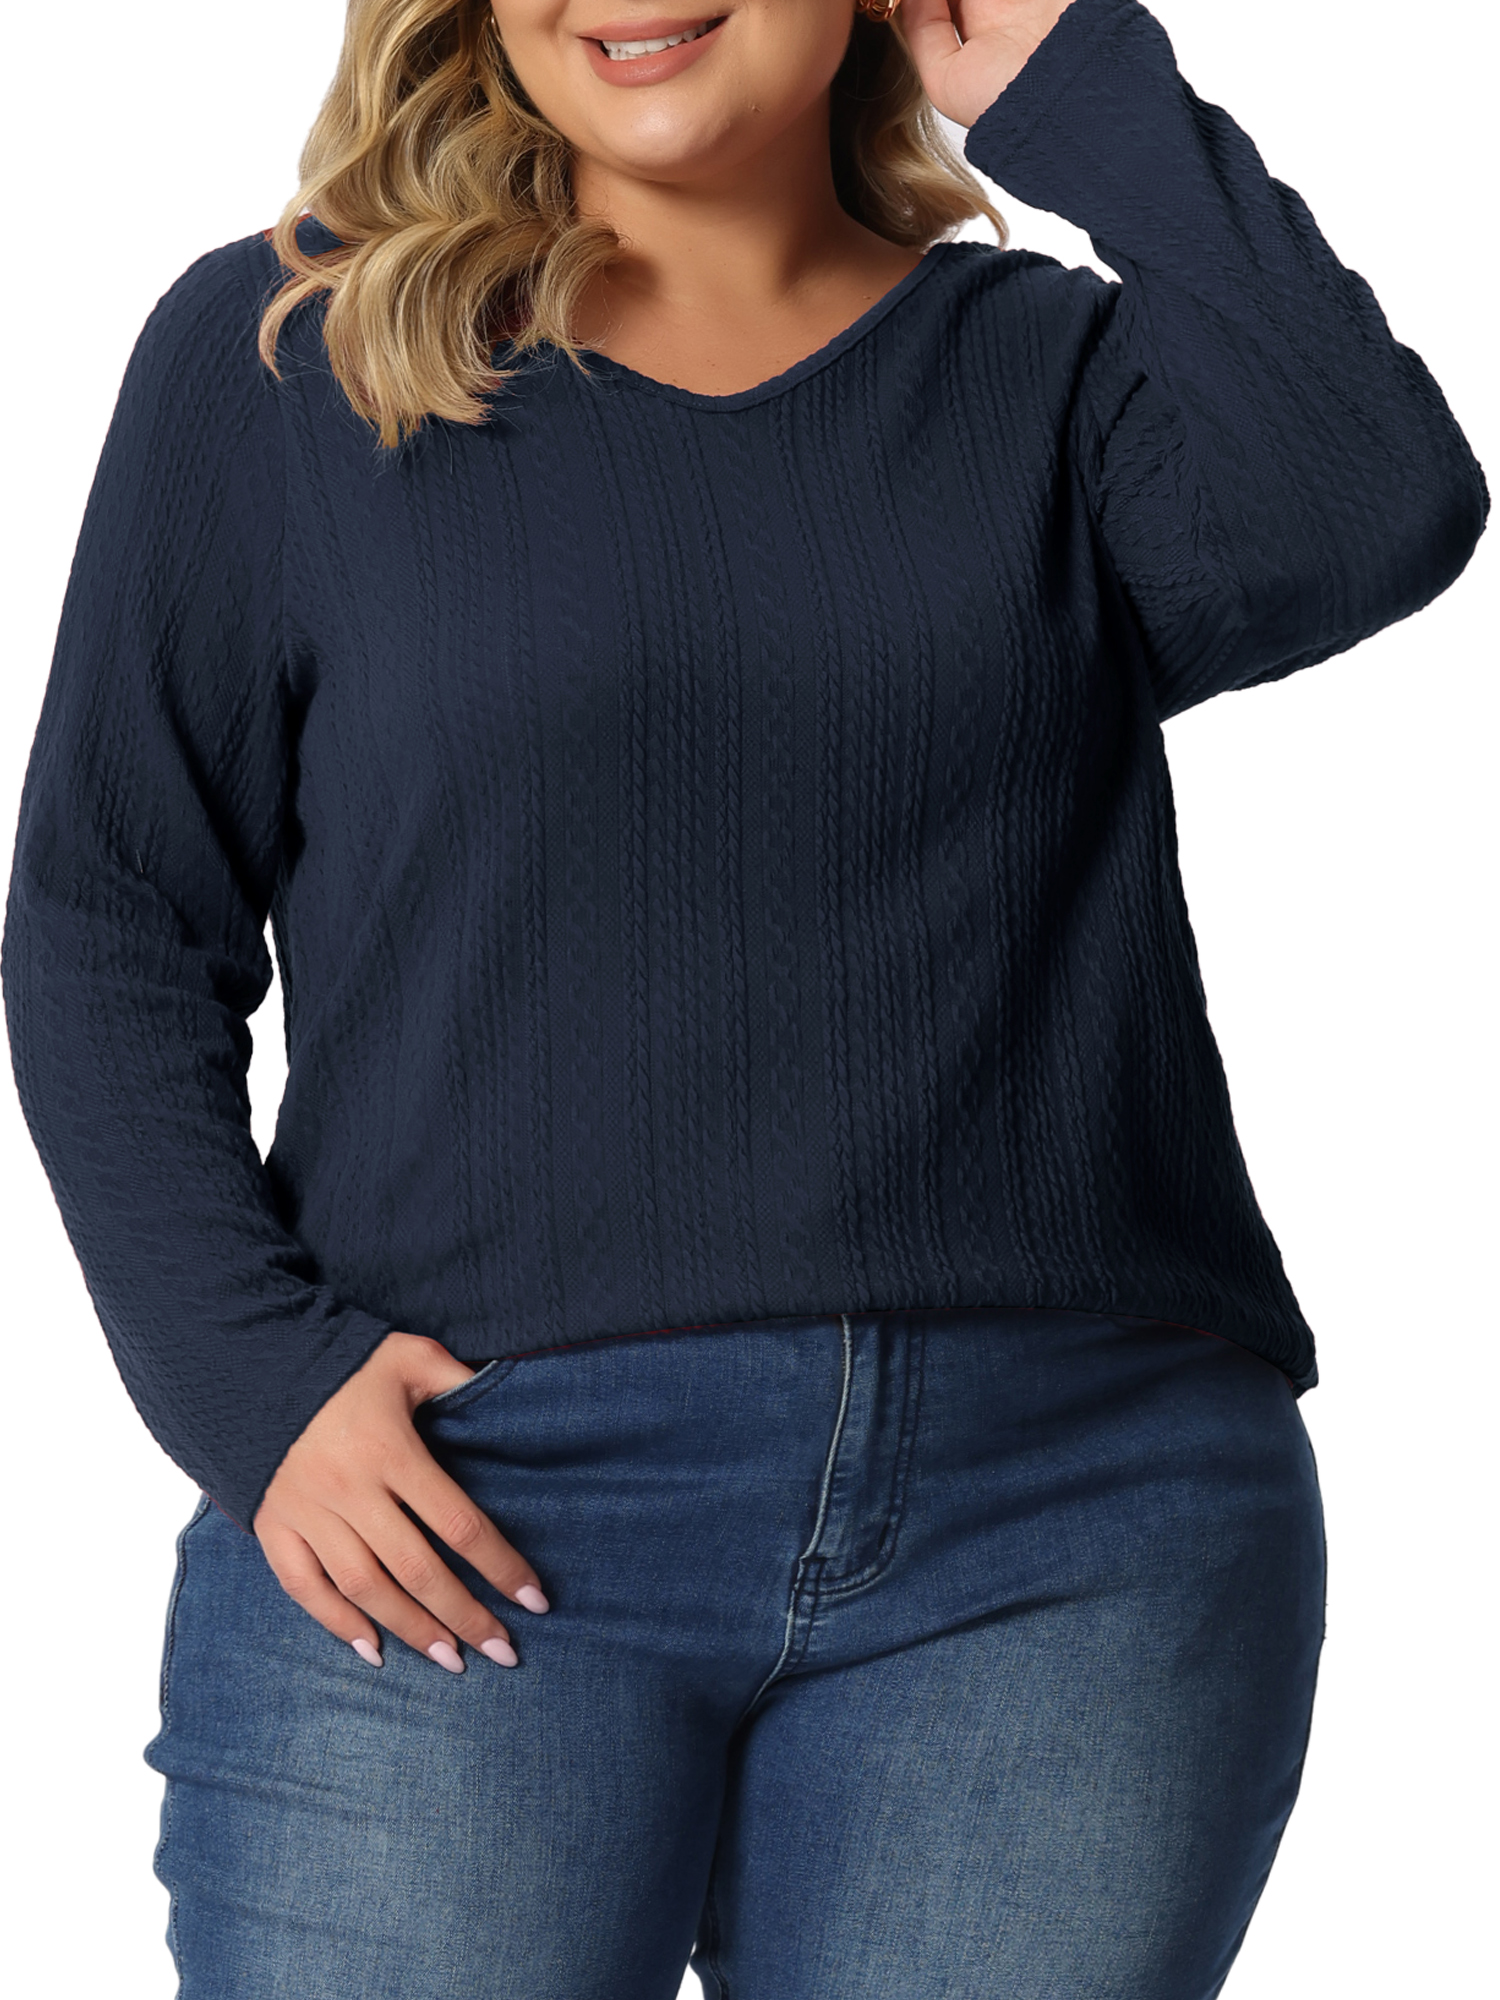 Unique Bargains Plus Size Top for Women Casual Round Neck Long Sleeve Knit Tunic Tops 2023